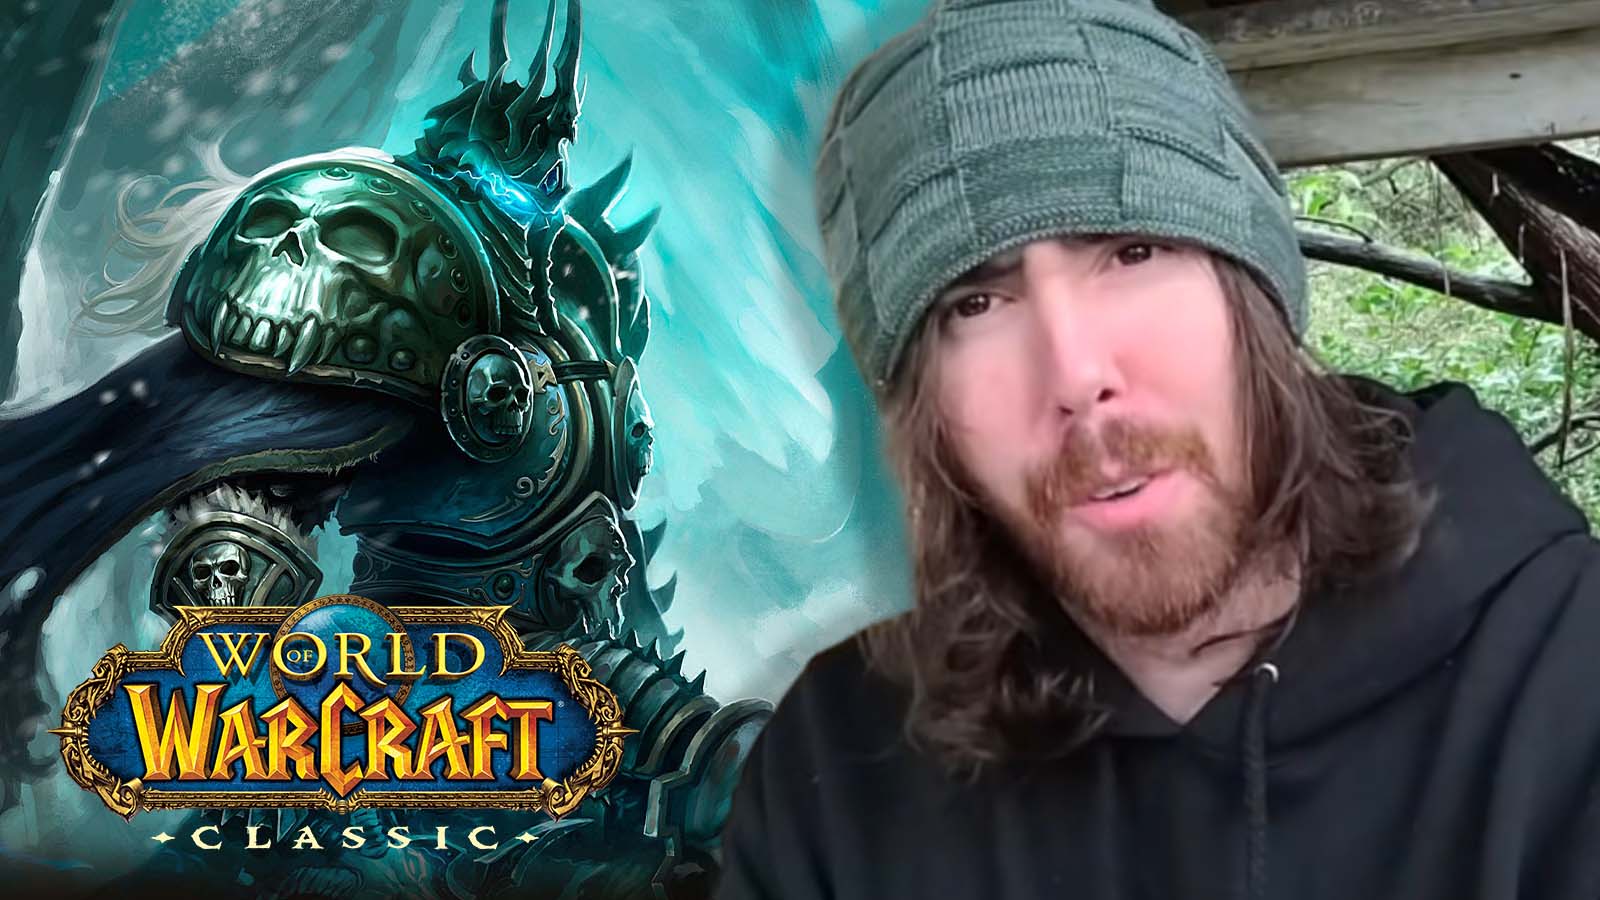 asmongold-wow-classic-wotlk